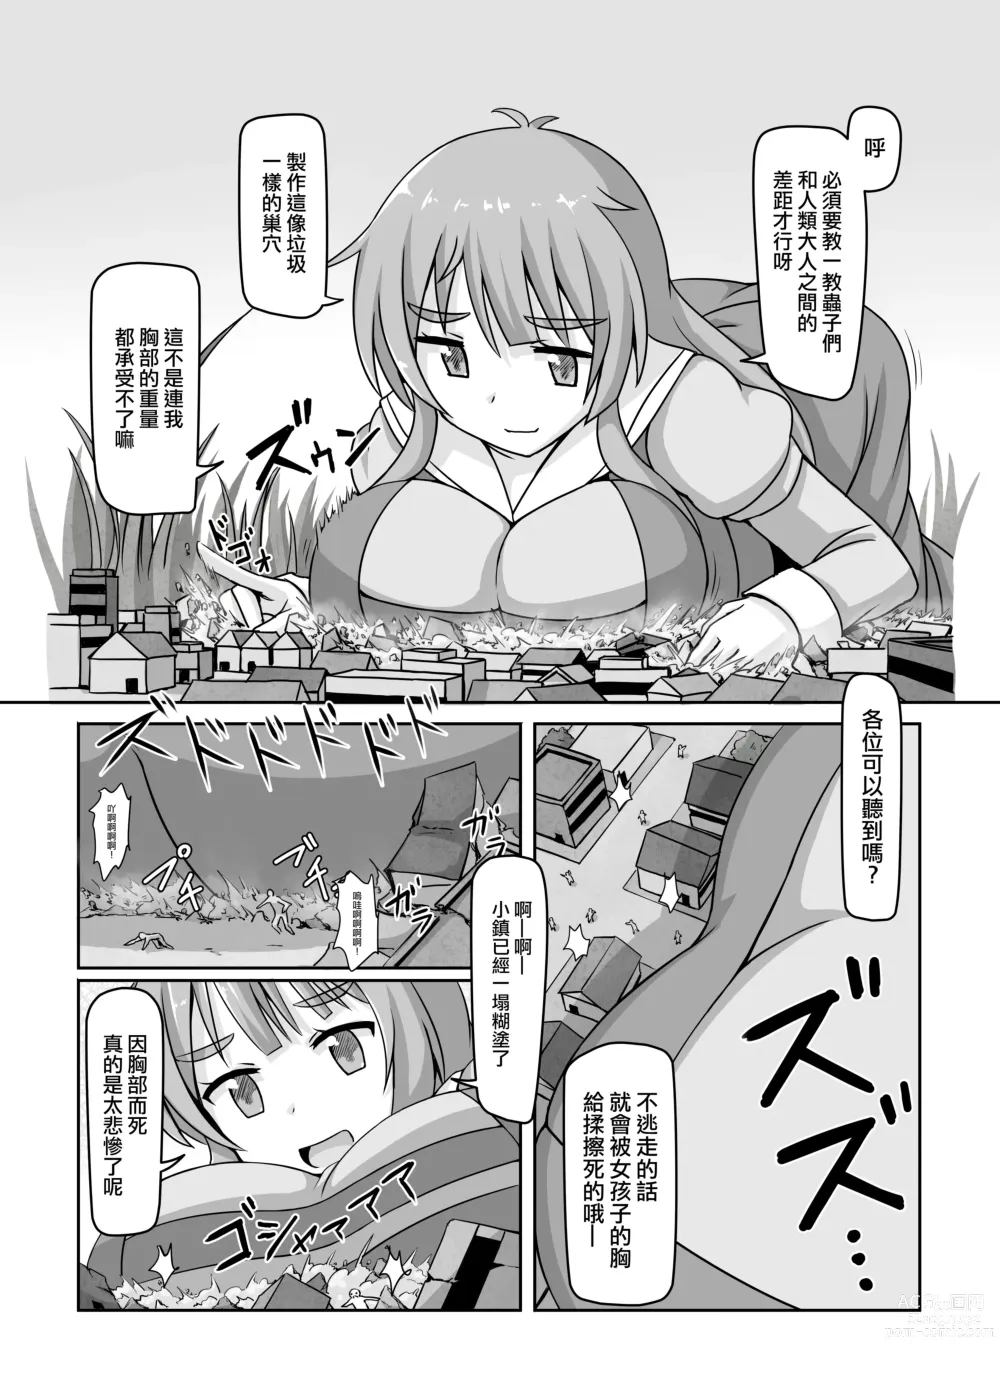 Page 19 of doujinshi 小小人類就由我來衰退